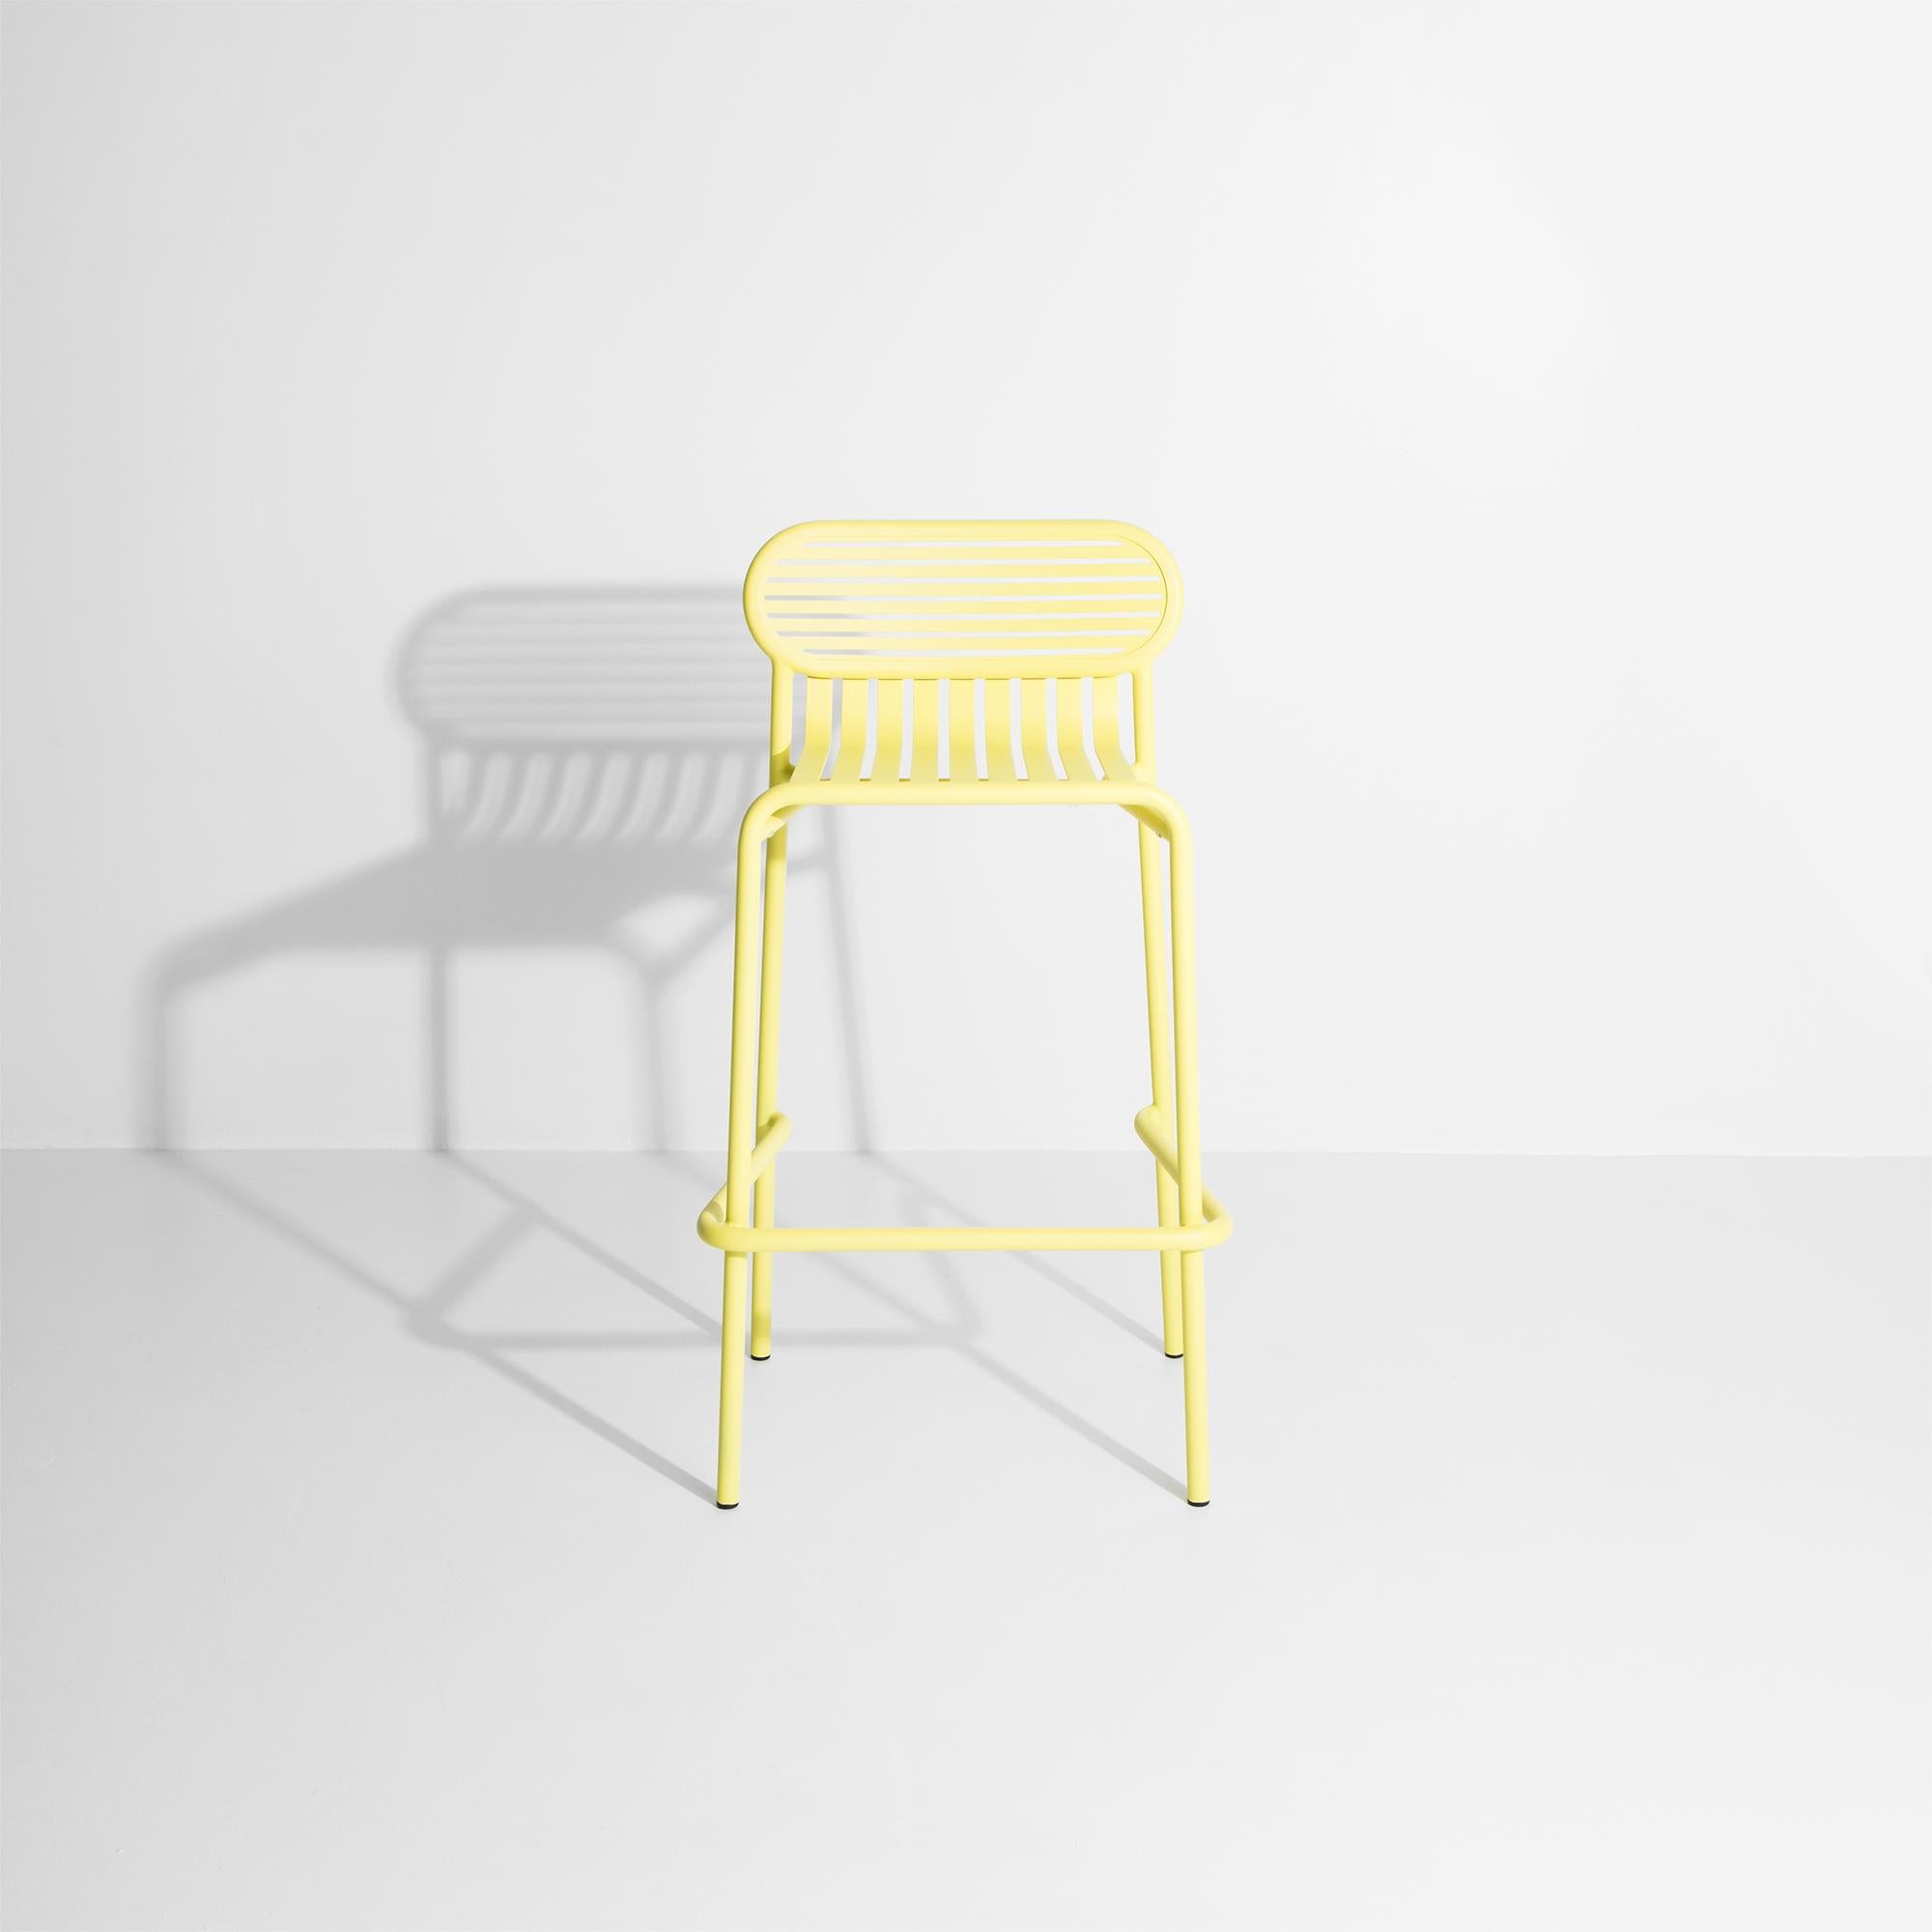 Petite Friture Week-End Bar Stool in Yellow Aluminium by Studio BrichetZiegler In New Condition For Sale In Brooklyn, NY